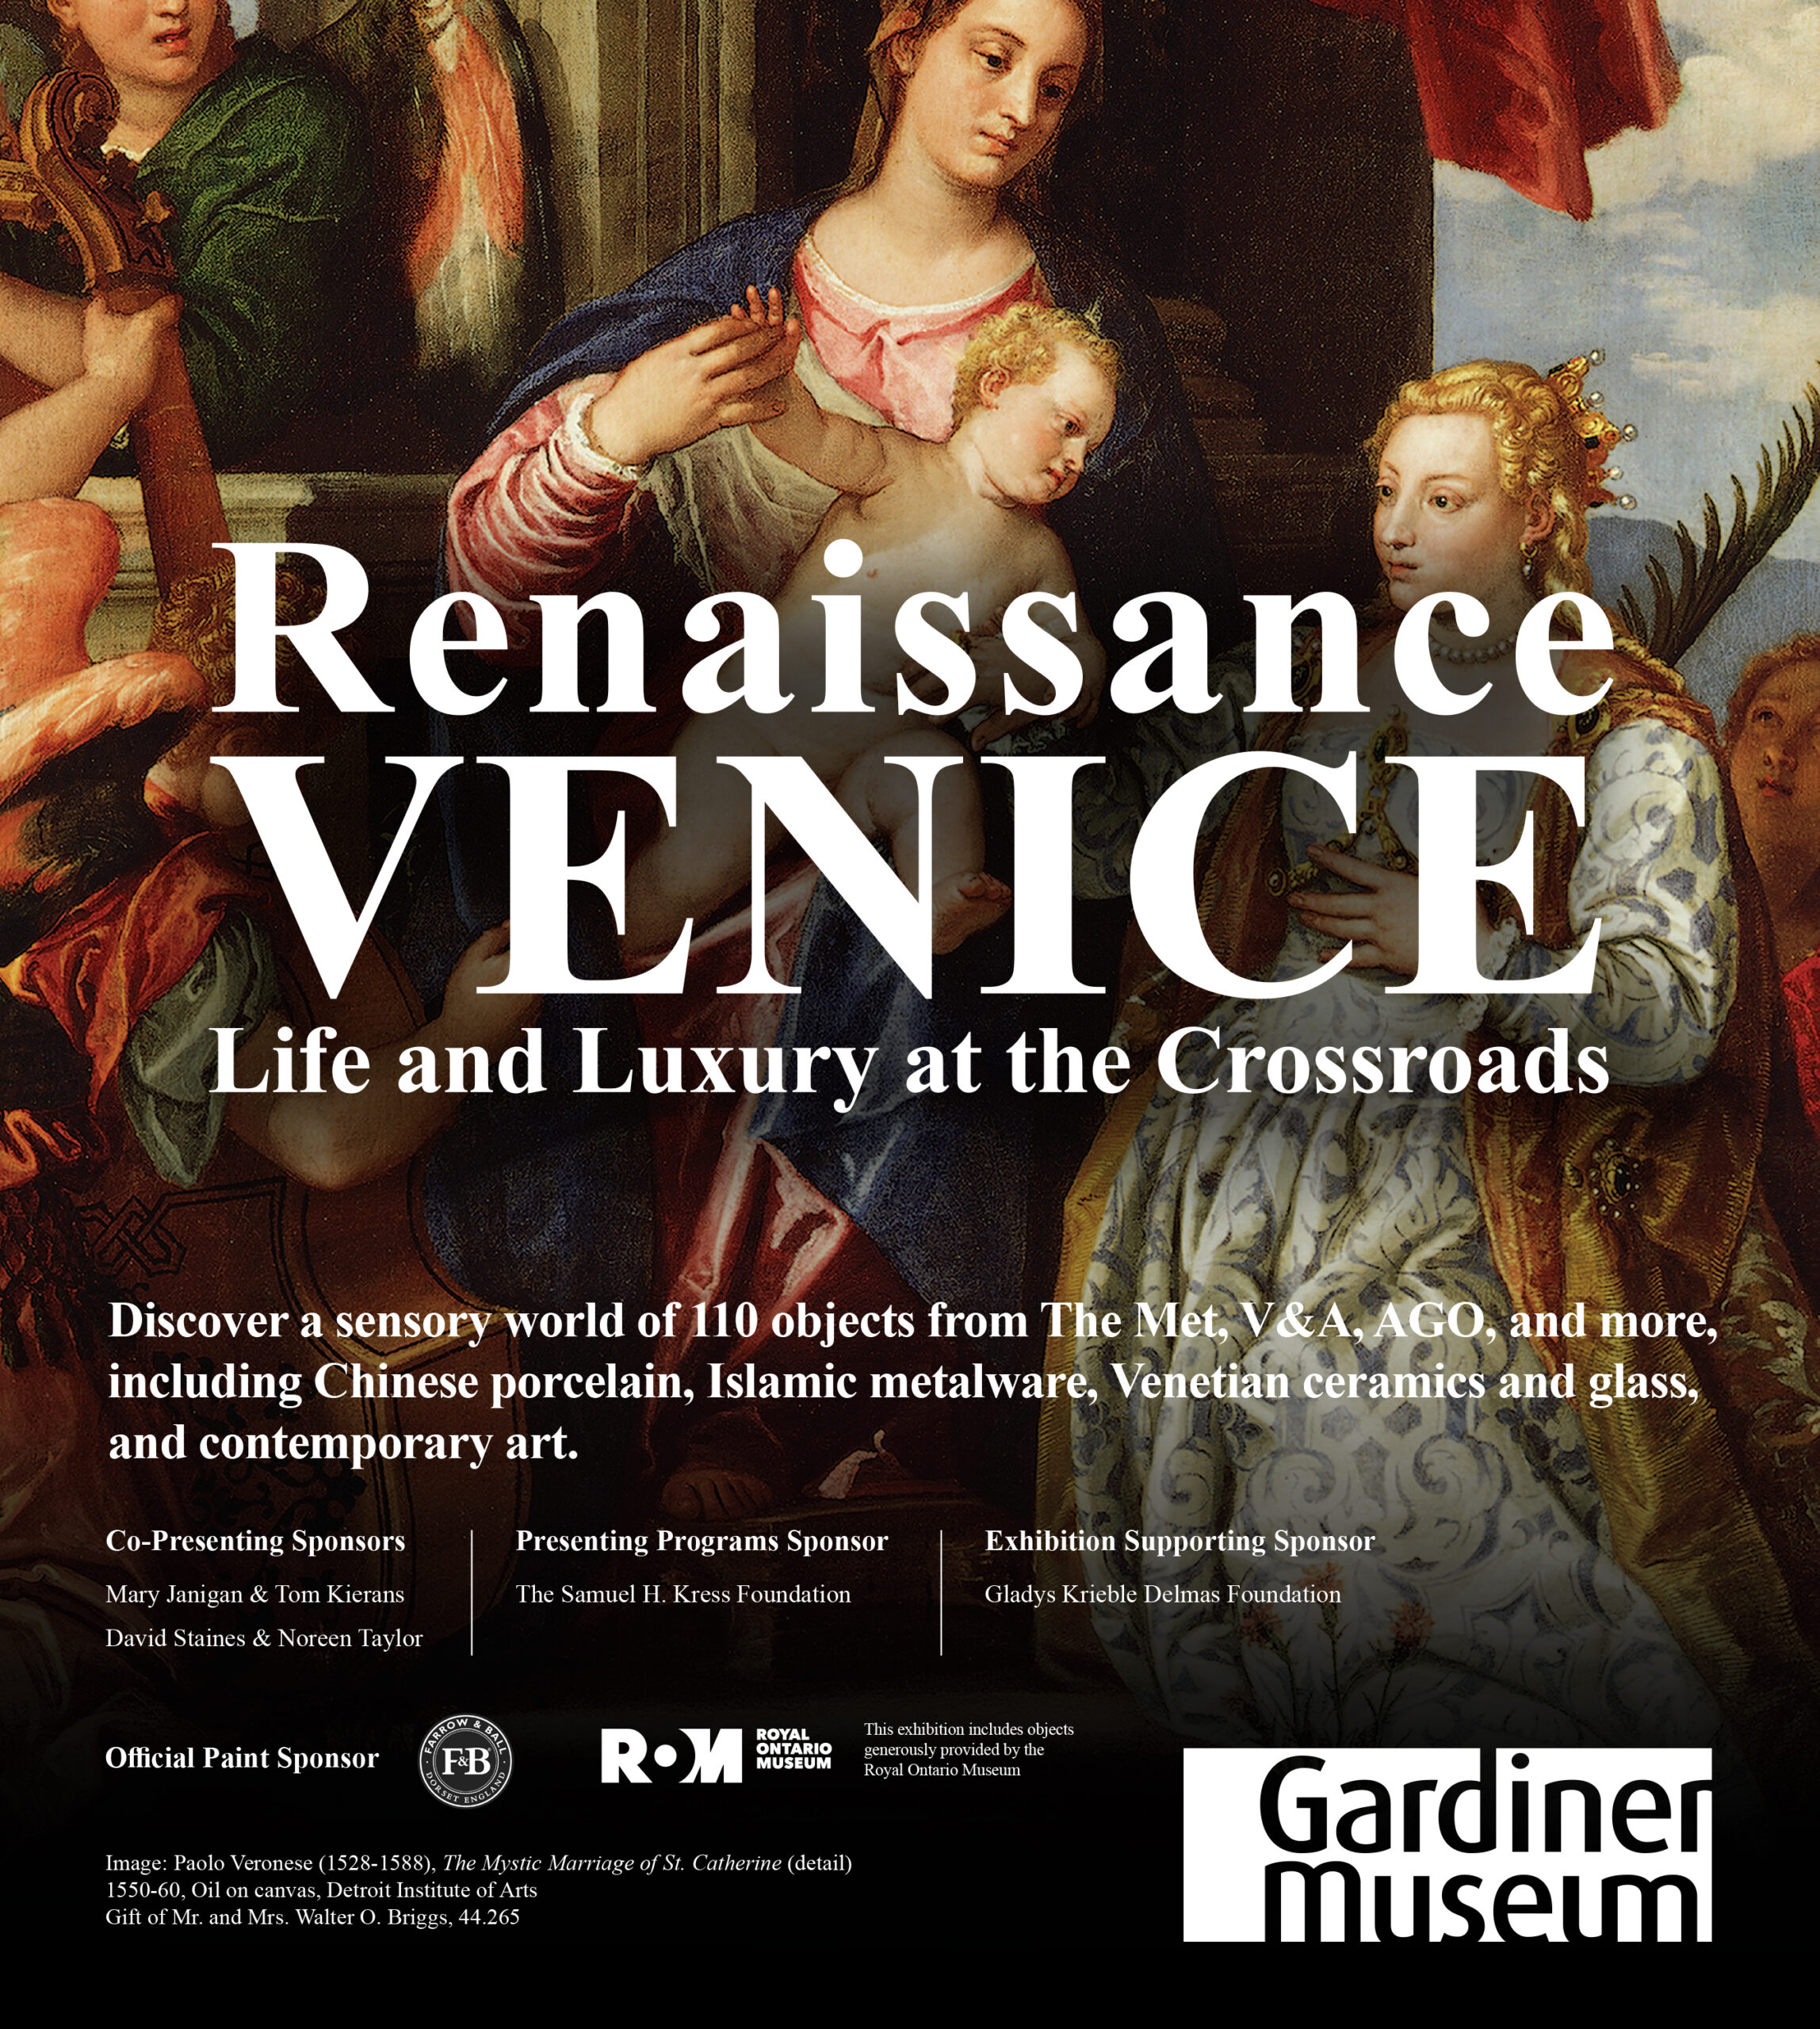 Renaissance Venice: Life and Luxury at the Crossroads